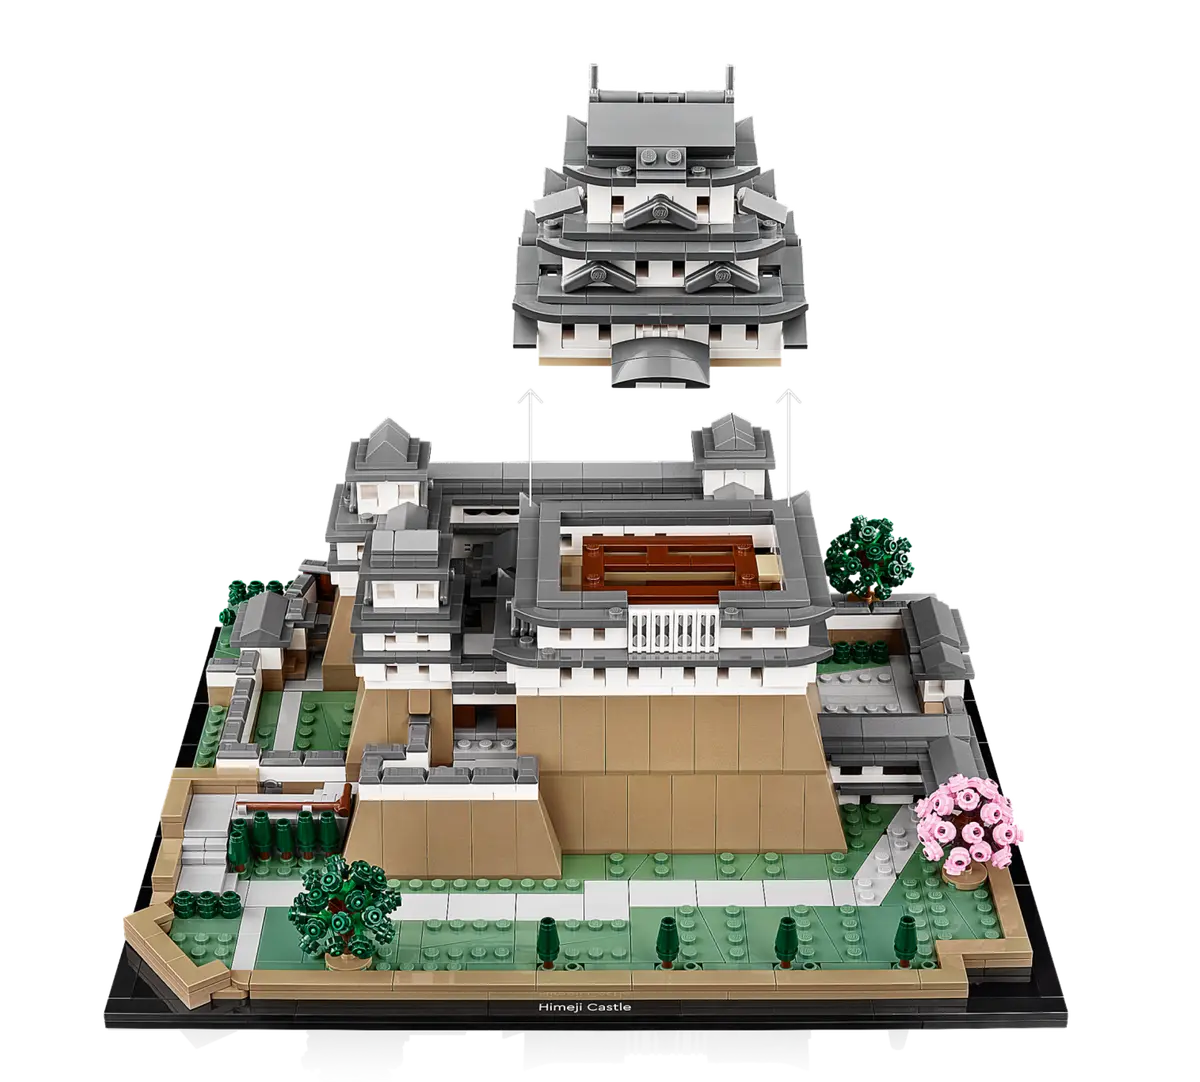 Build Japan's Himeji Castle with Lego's latest collection for adults